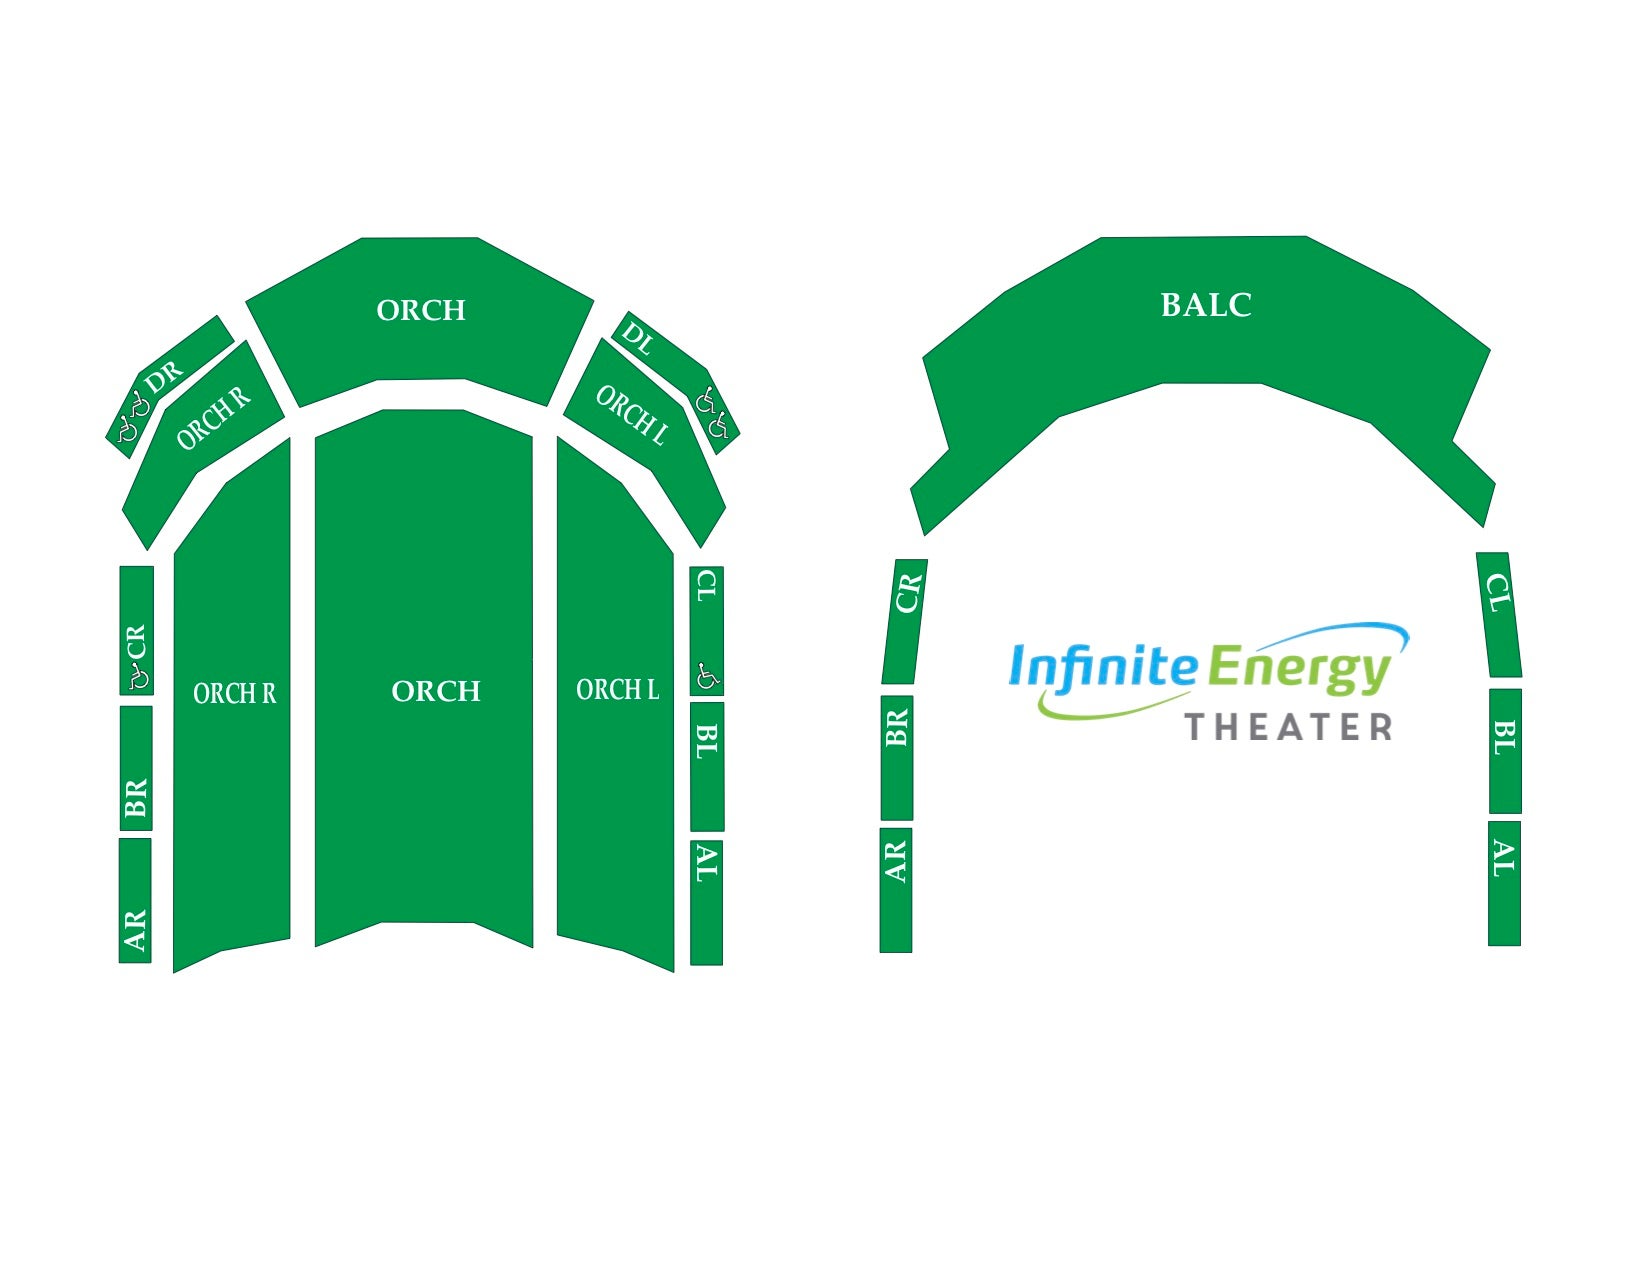 Infinite Energy Arena Seating Chart With Seat Numbers